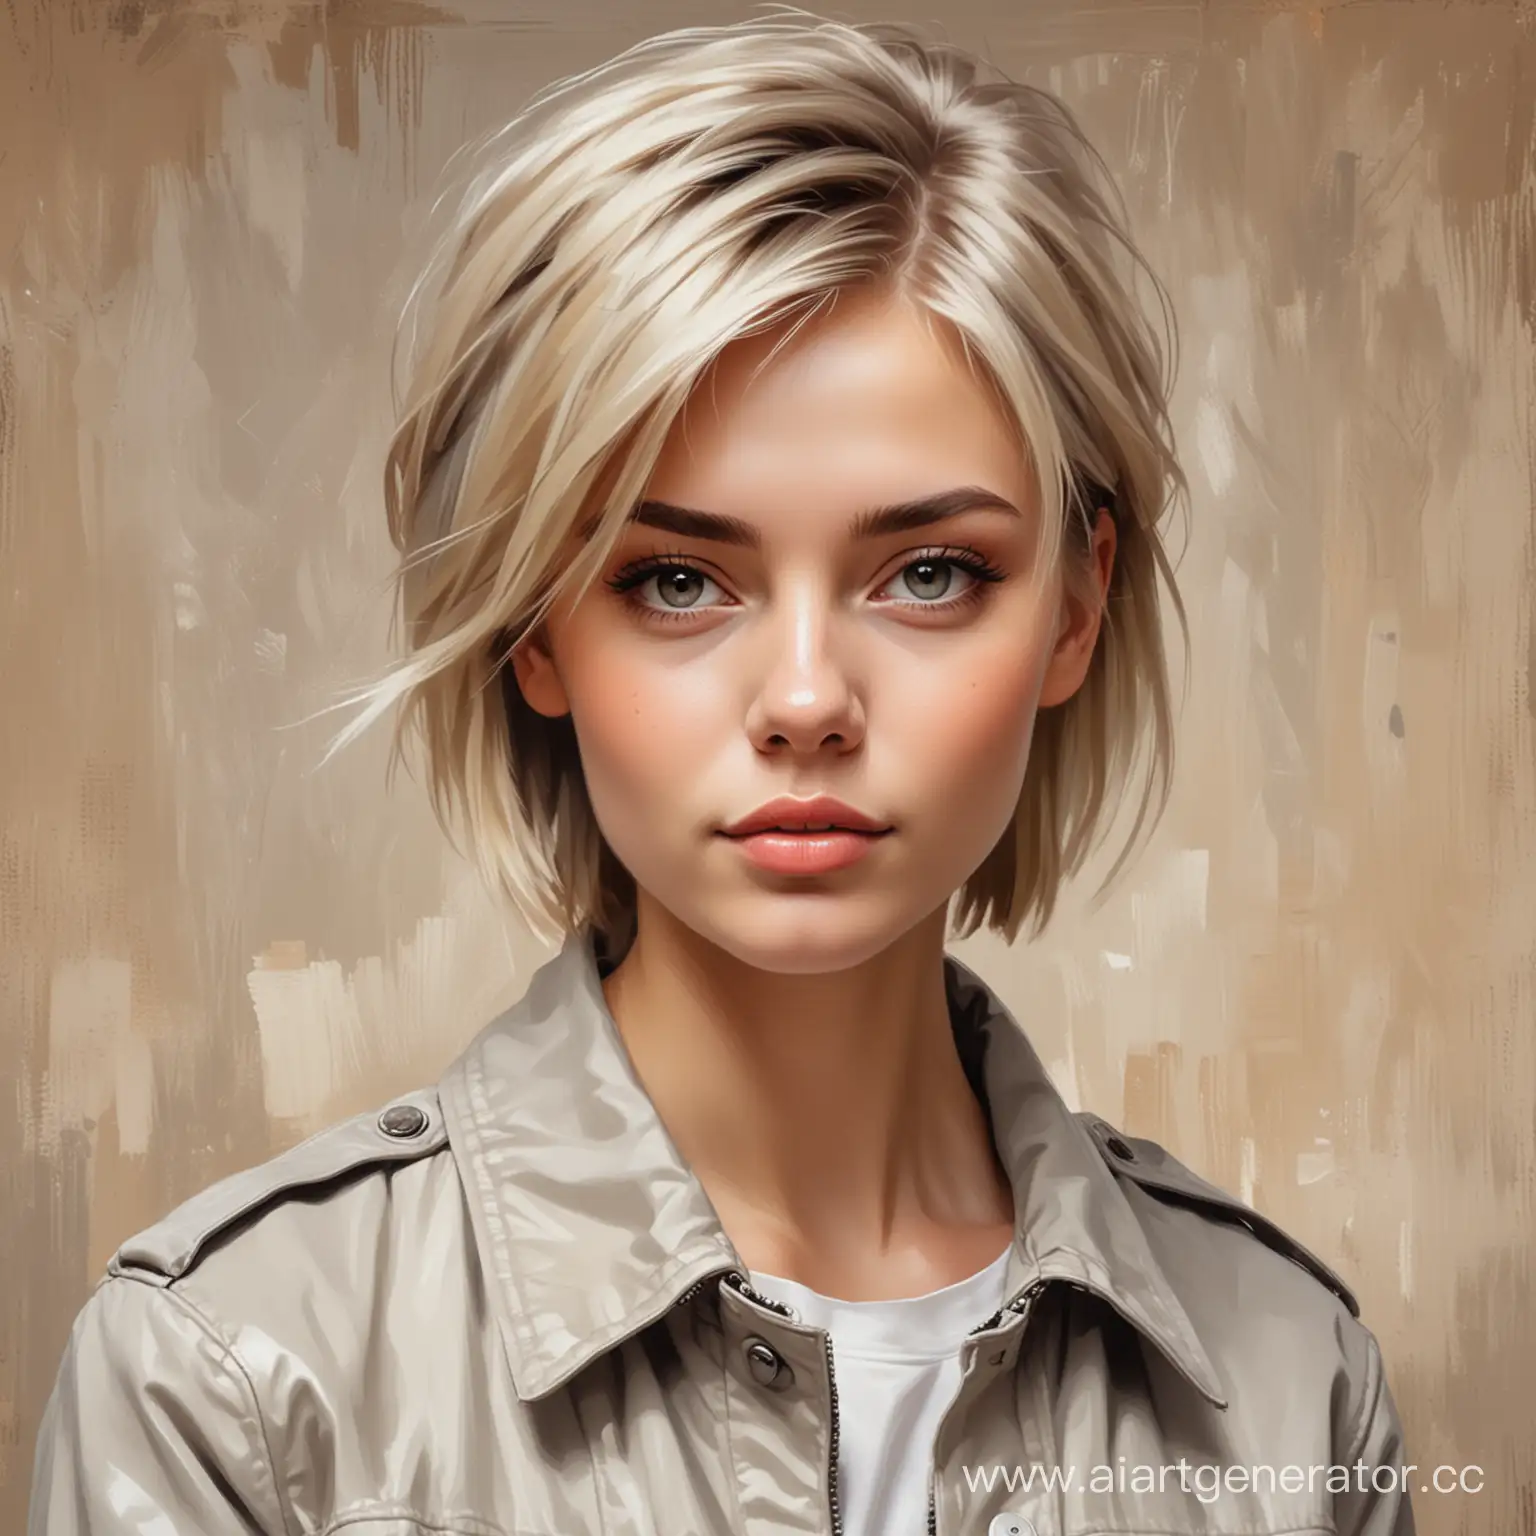 Portrait-of-a-Girl-with-Short-Blonde-Hair-in-Oil-Painting-Style